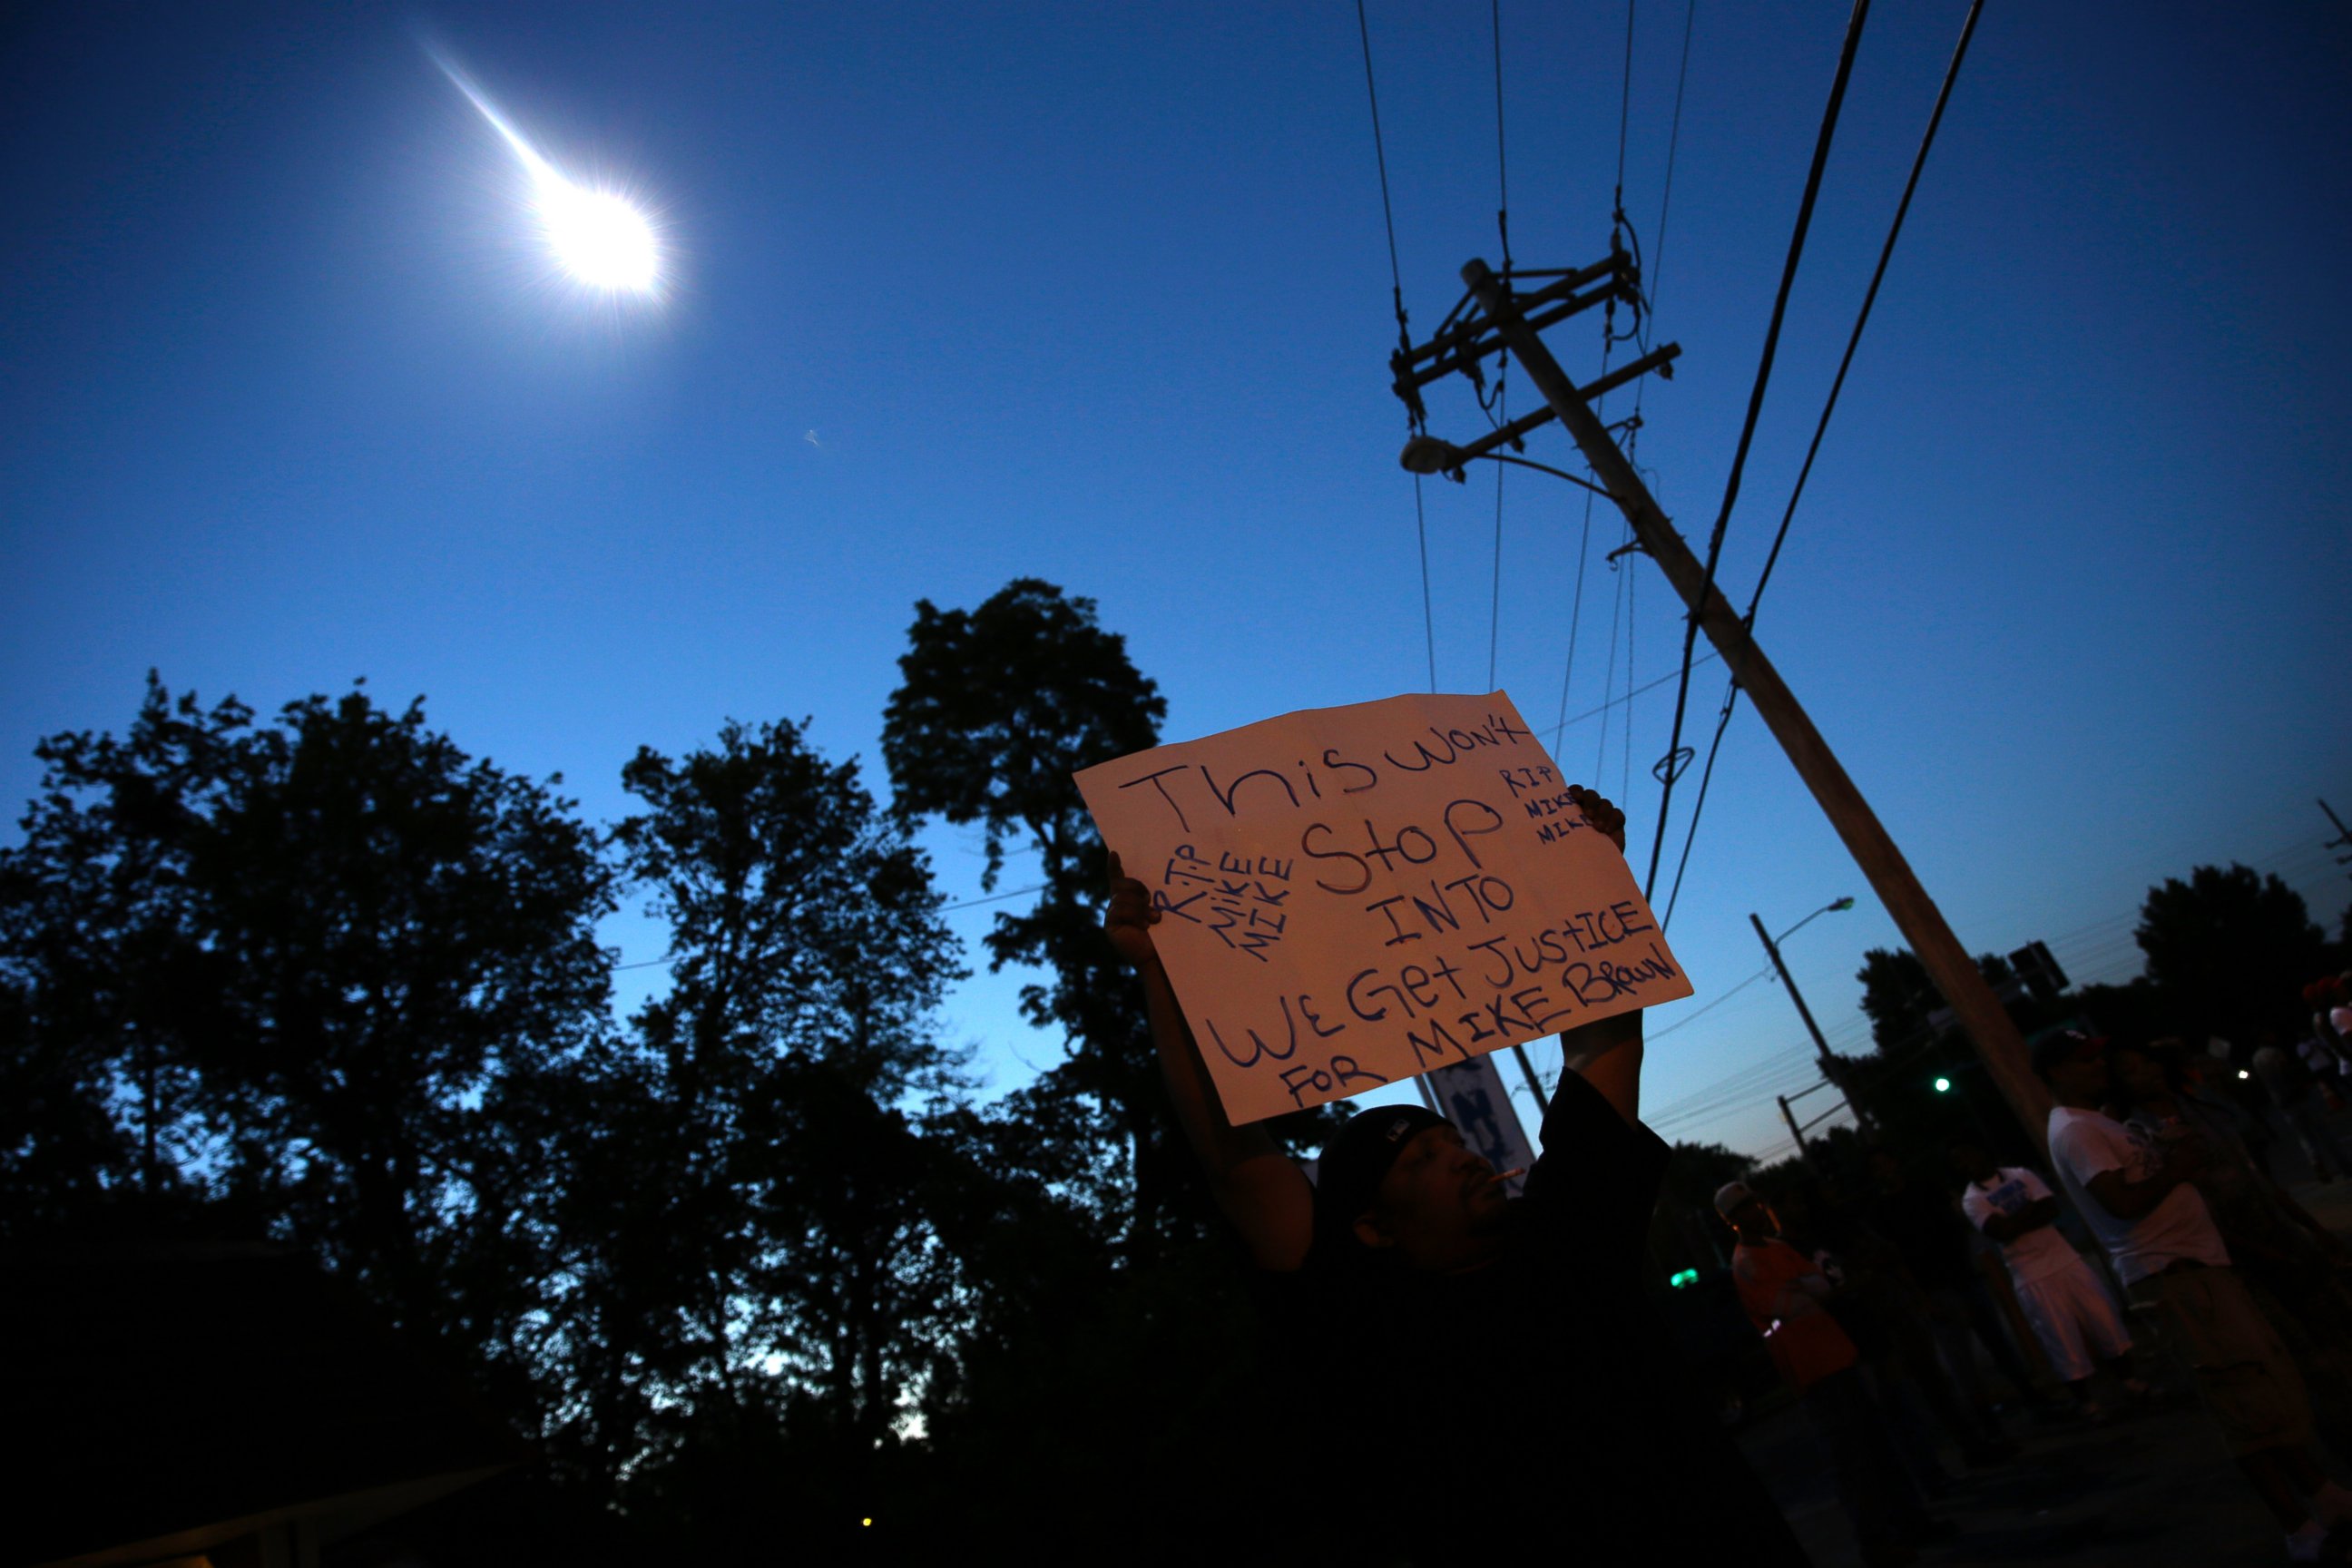 PHOTO: A protester holds up a sign as a police helicopter circles overhead, Aug. 13, 2014, in Ferguson, Mo.